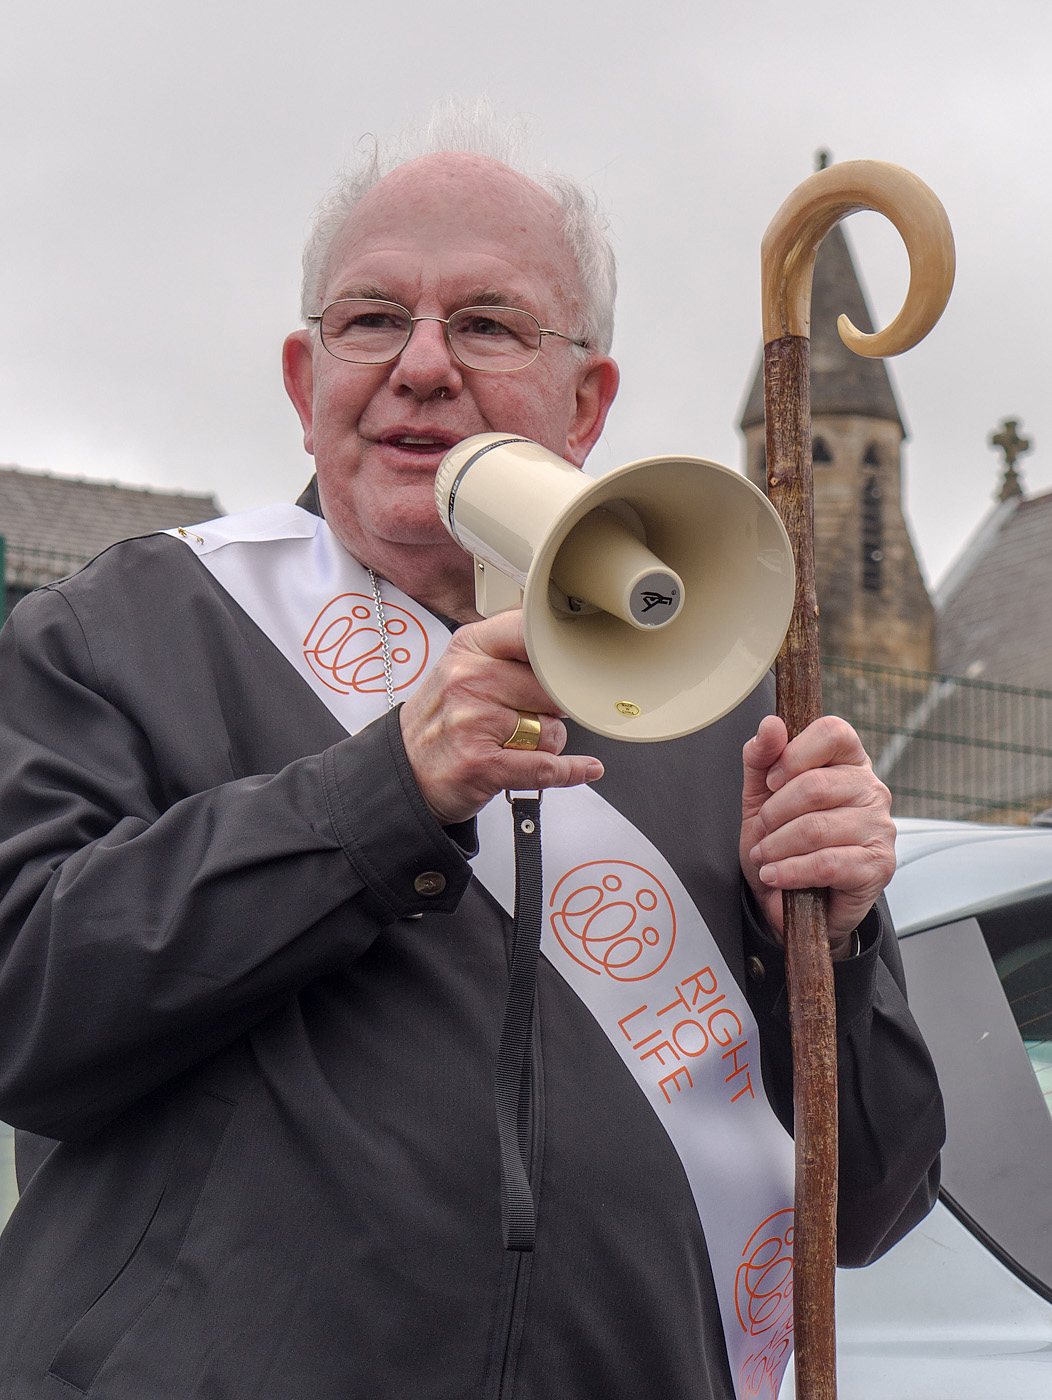 Archbishop Patrick Kelly - Liverpool's Archbishop Emeritus - tells the walkers to be consistently pro life, upholding the value and dignity of every life at every stage.